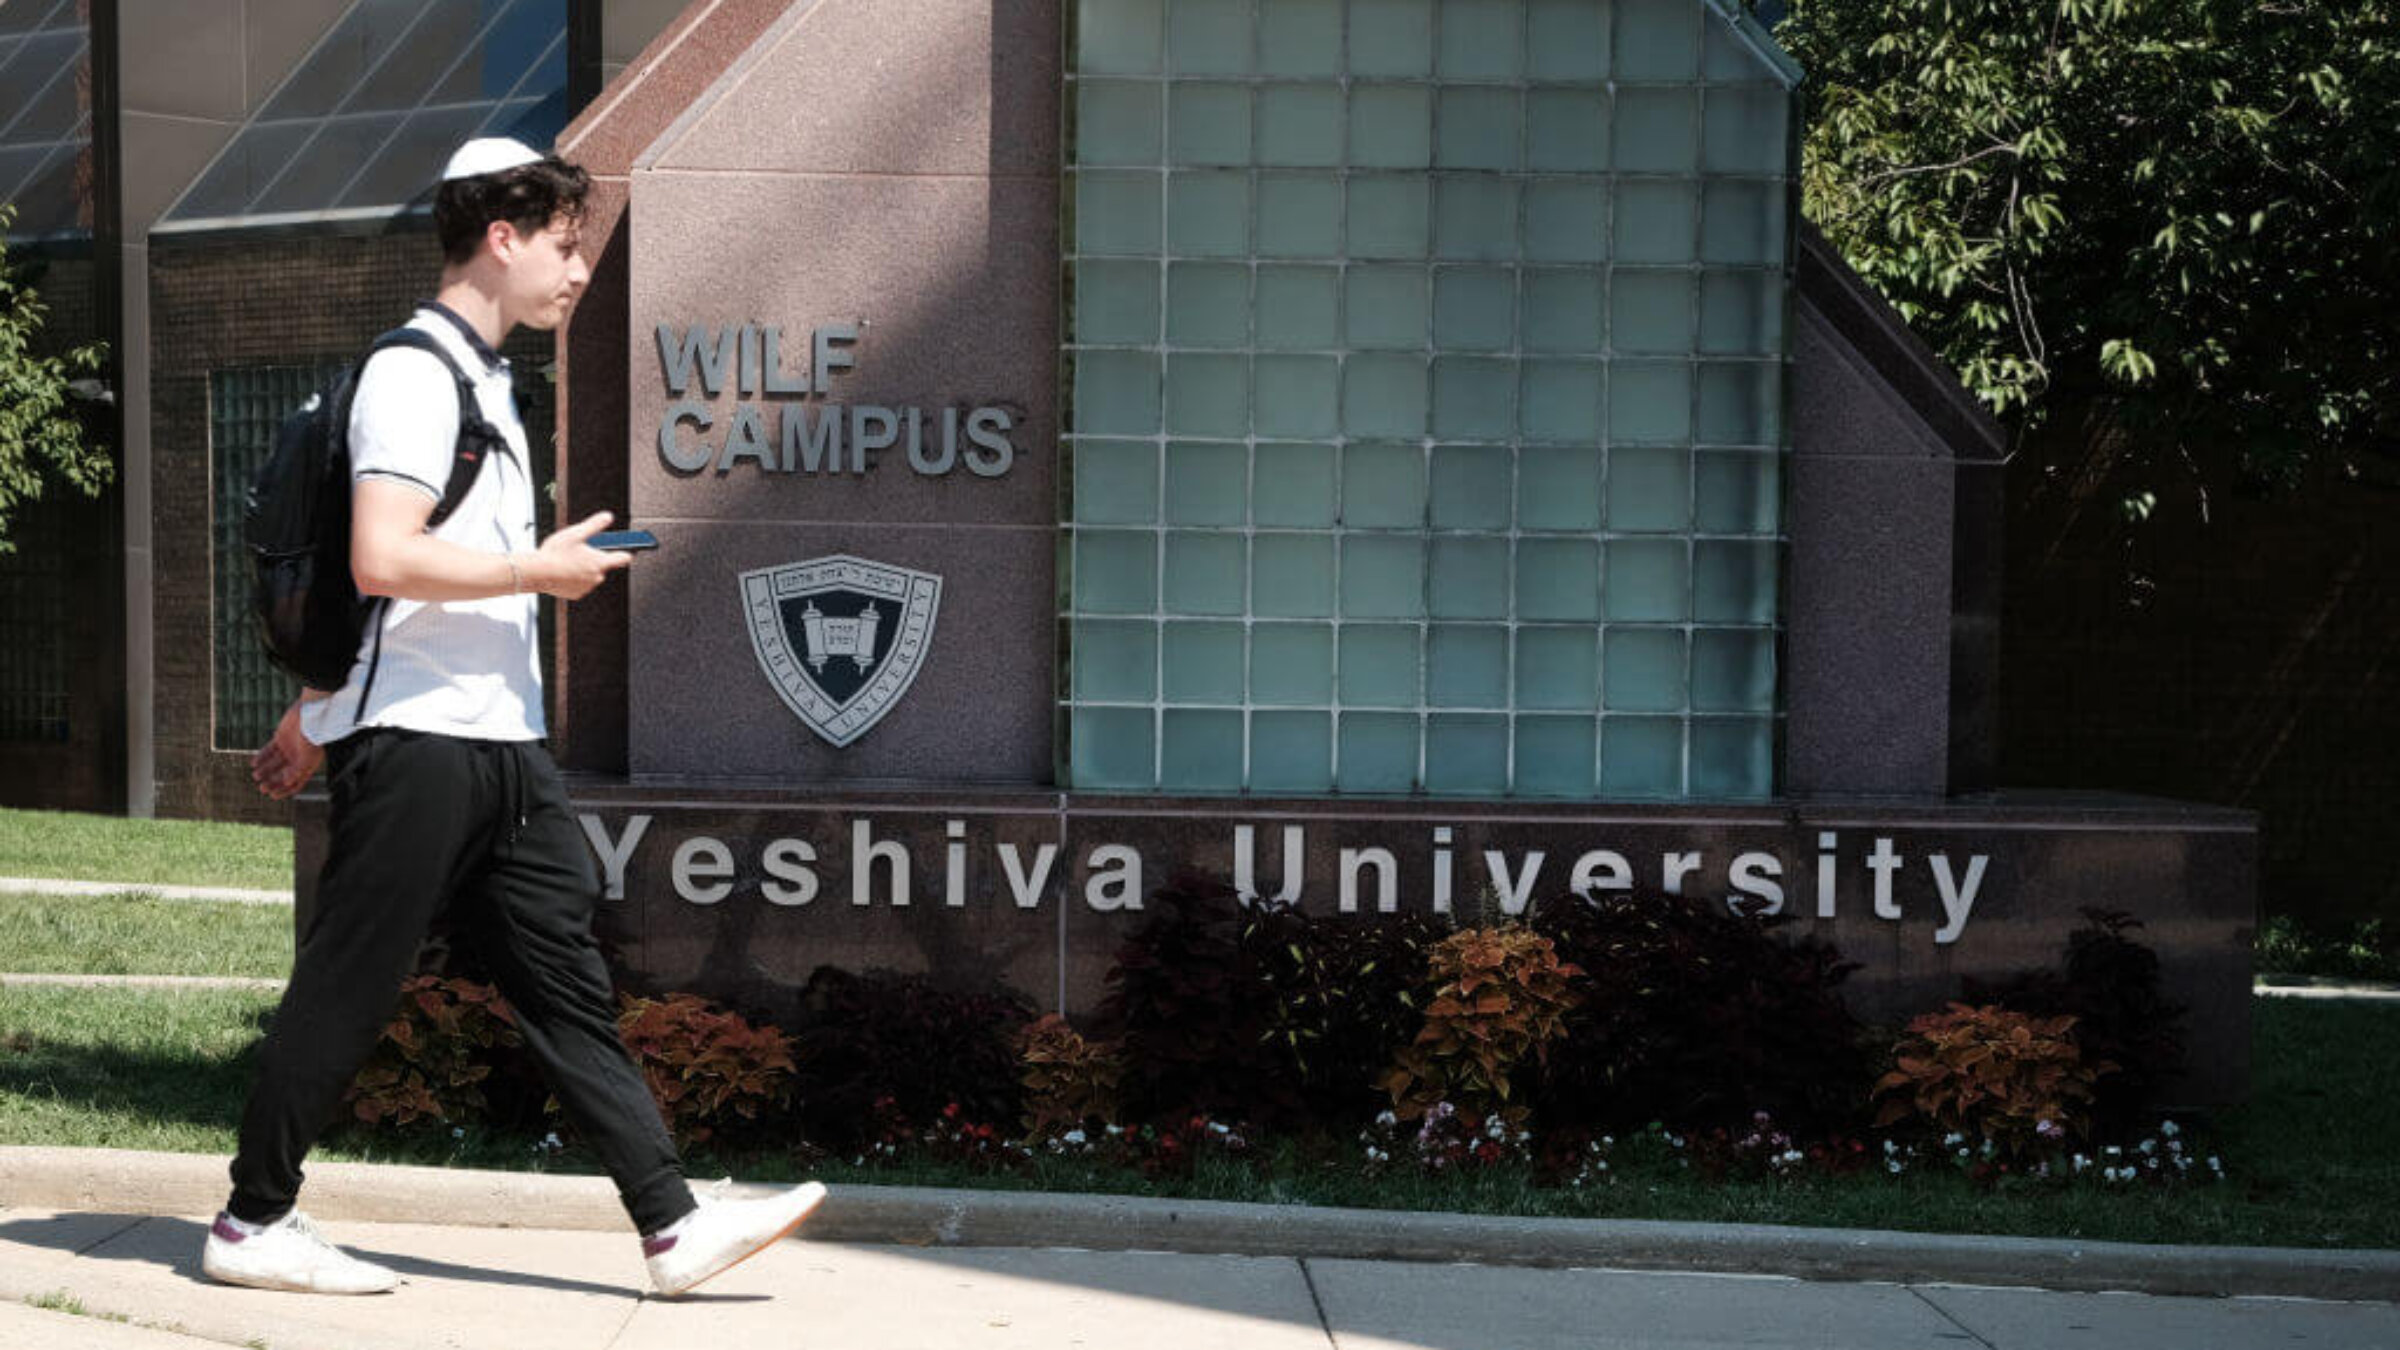 The men’s campus of Yeshiva University in New York City on August 30, 2022.